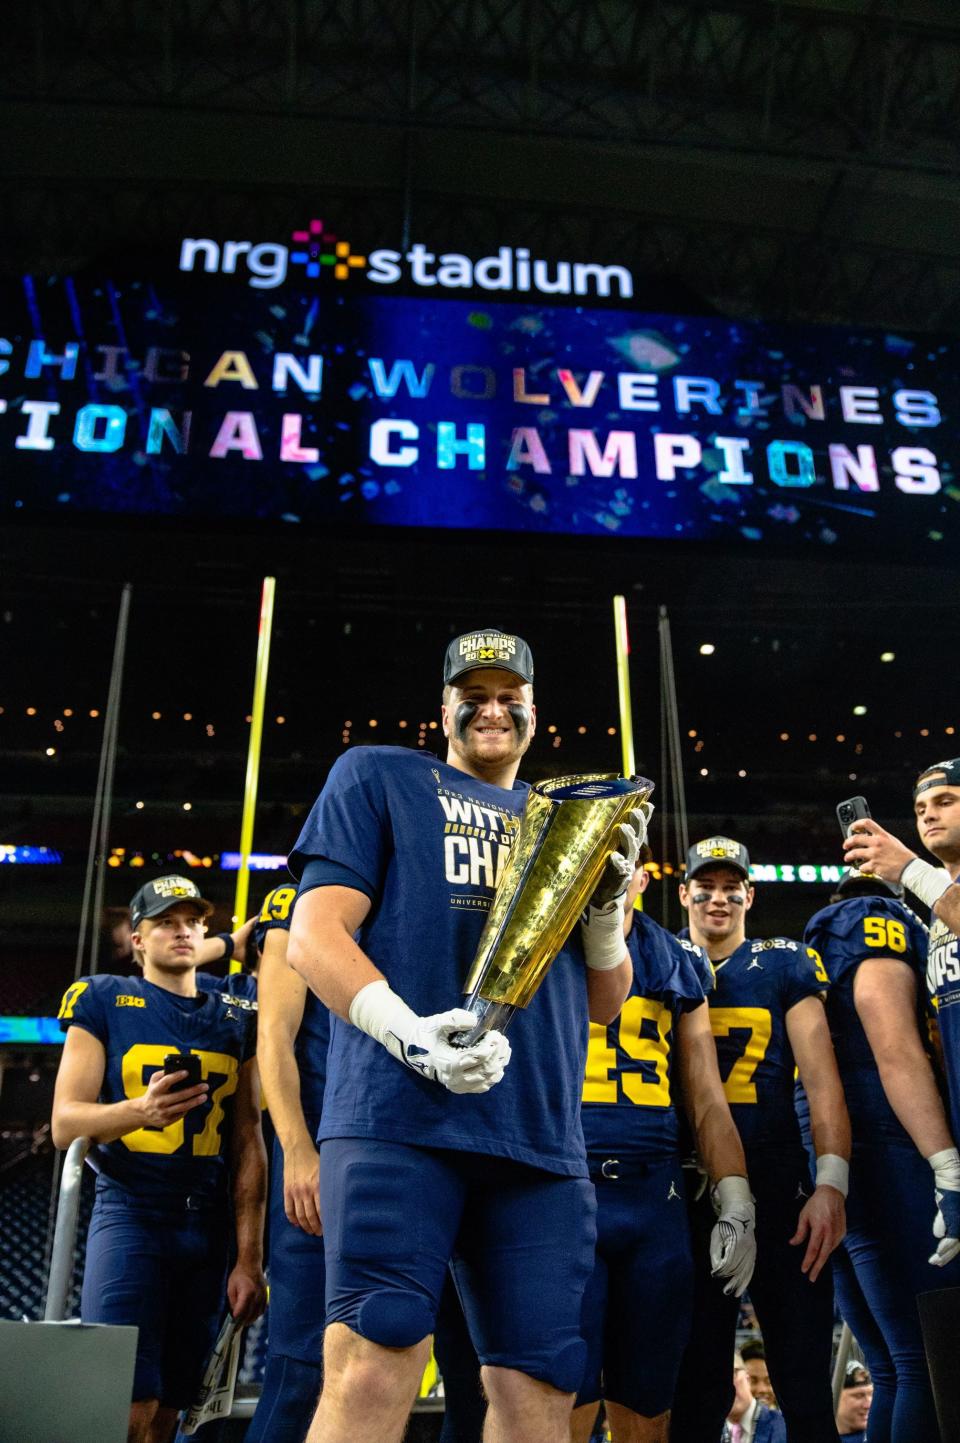 Peter Simmons III hold the CFP National Championship trophy following Michigan's 34-13 win over No. 2 Washington